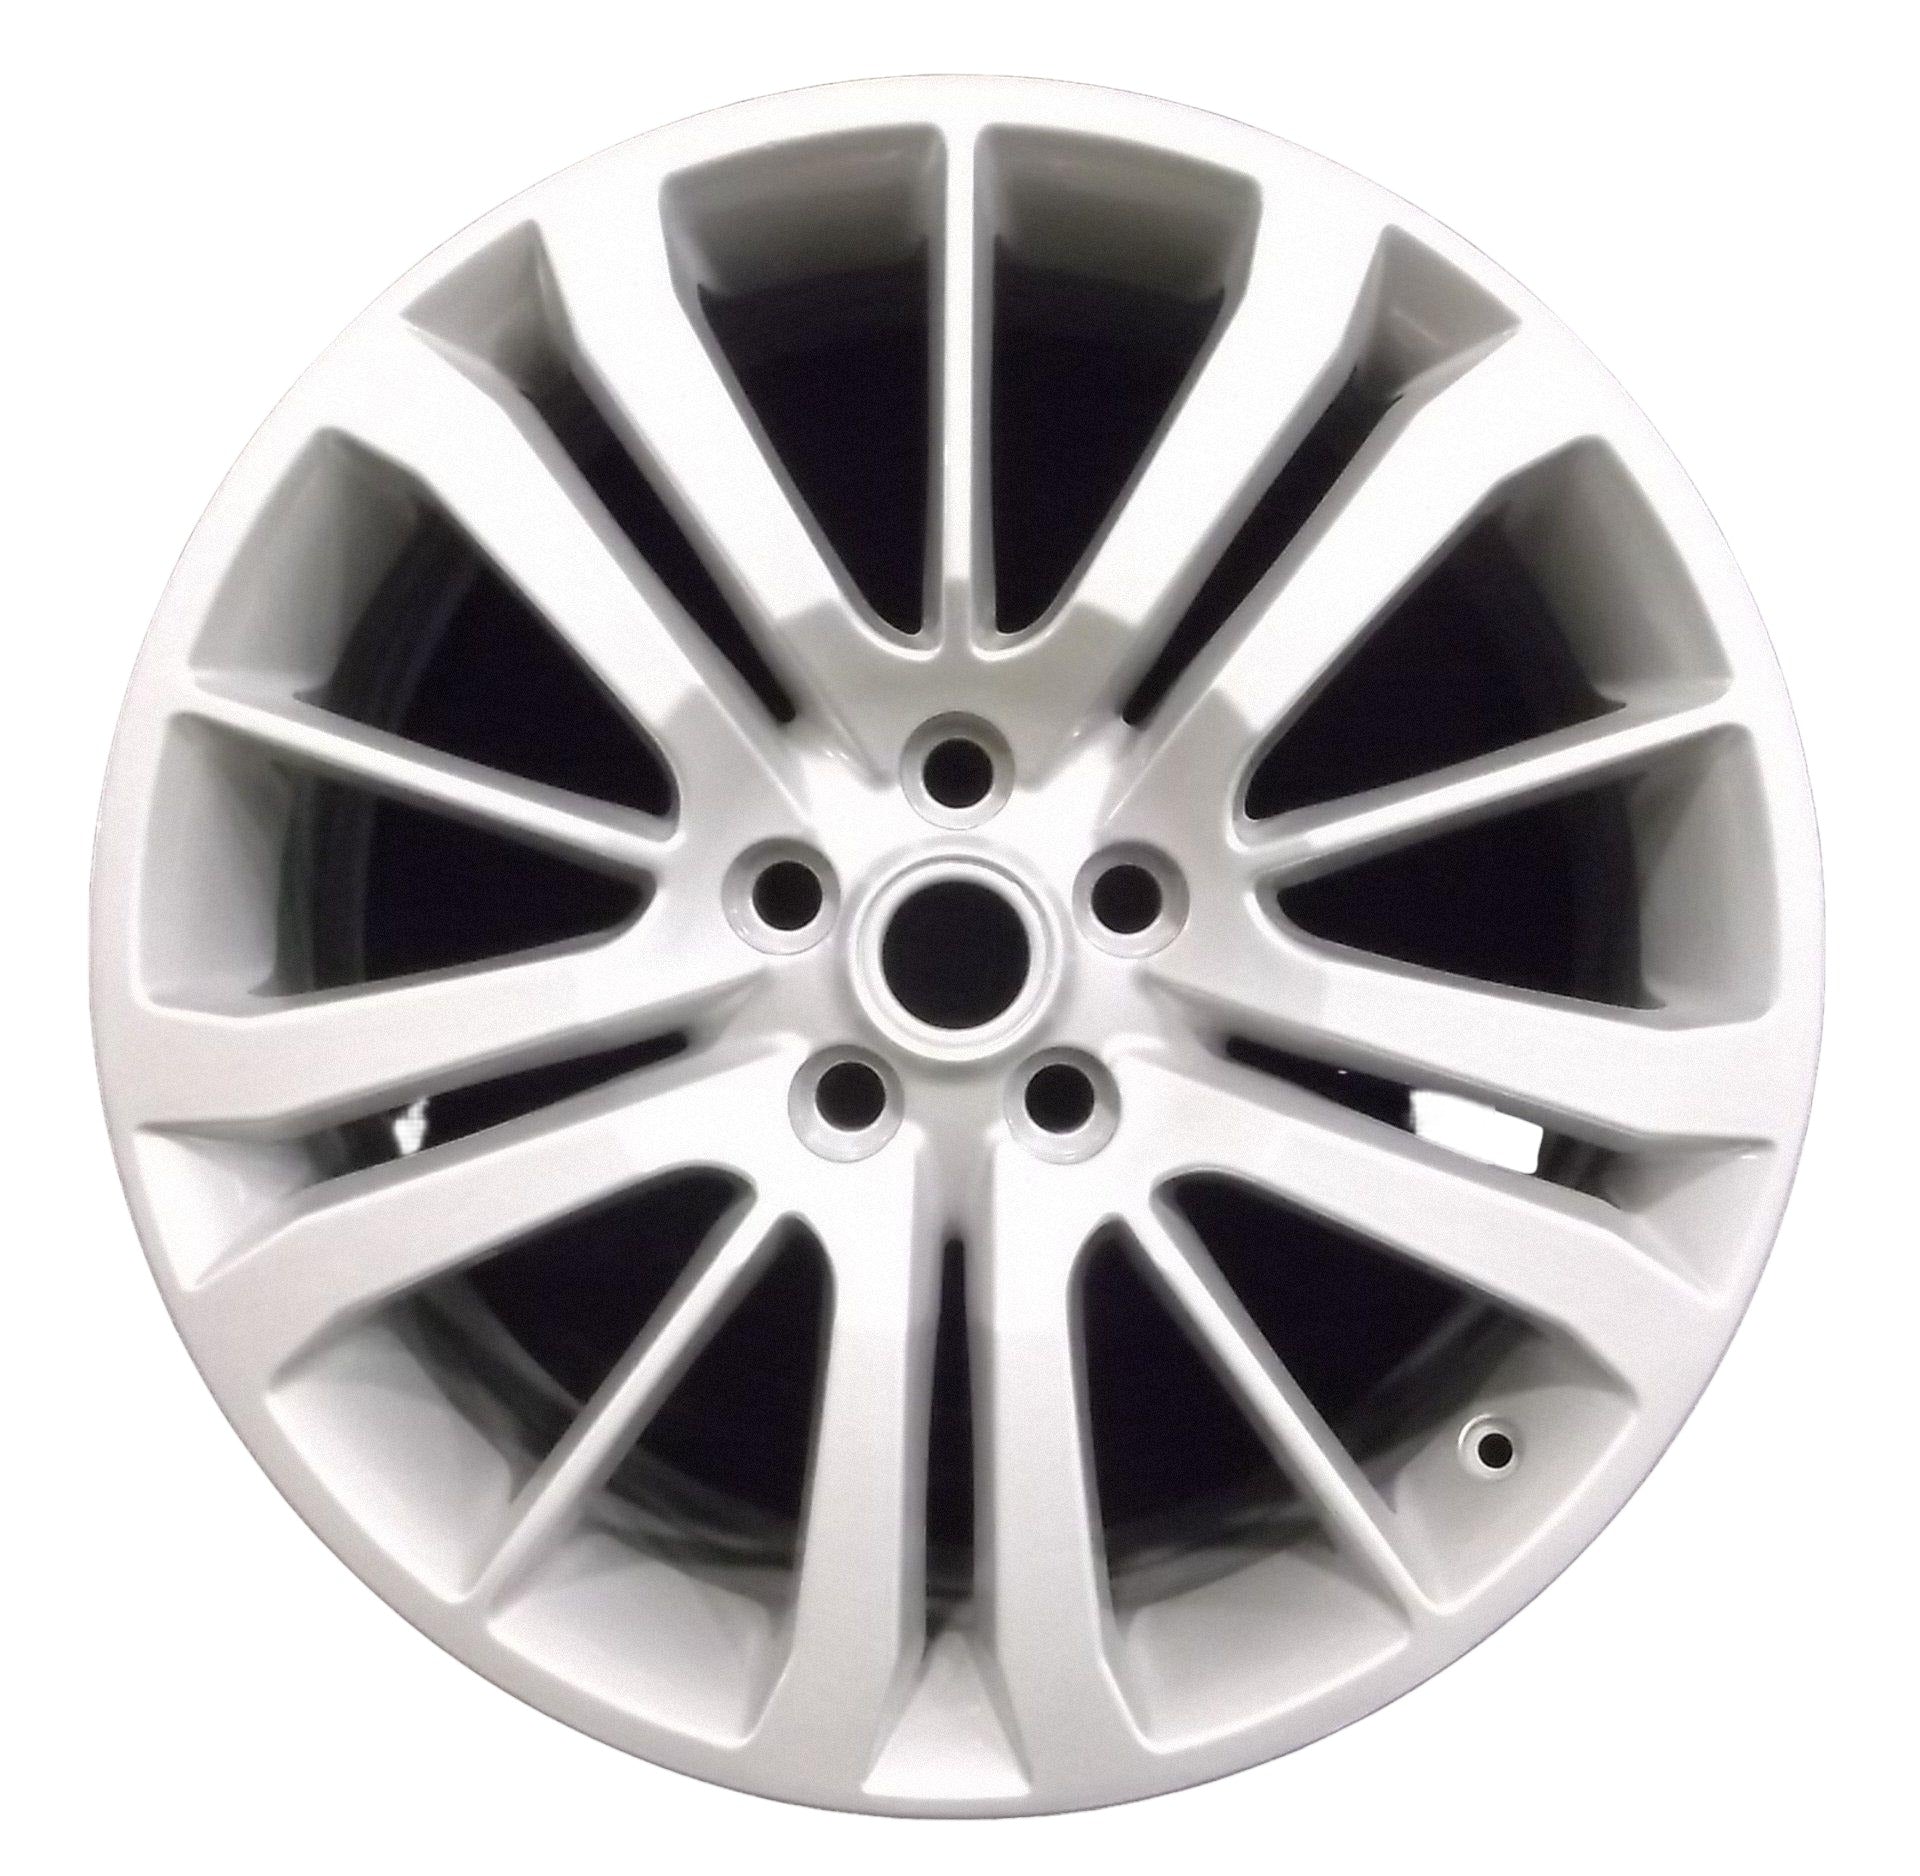 Land Rover Range Rover Sport  2009, 2010, 2011, 2012, 2013 Factory OEM Car Wheel Size 20x9.5 Alloy WAO.72208.PS08.FF